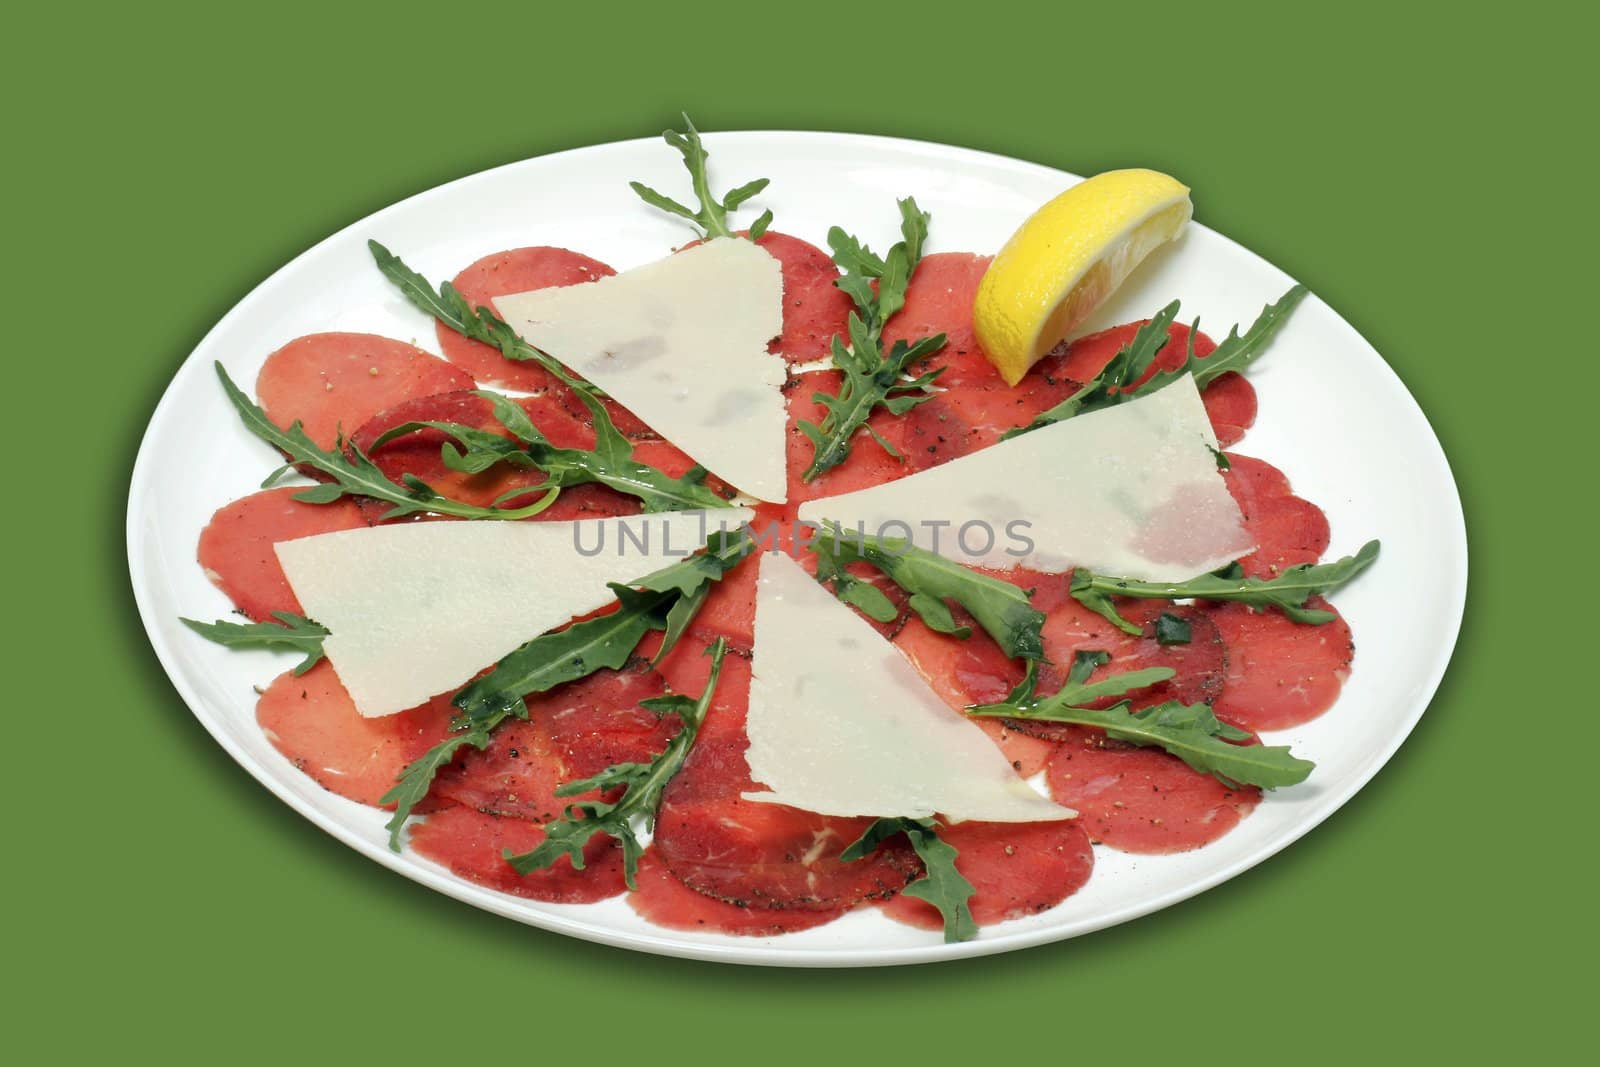 Cold snack - Beef carpaccio with parmesan cheese. 